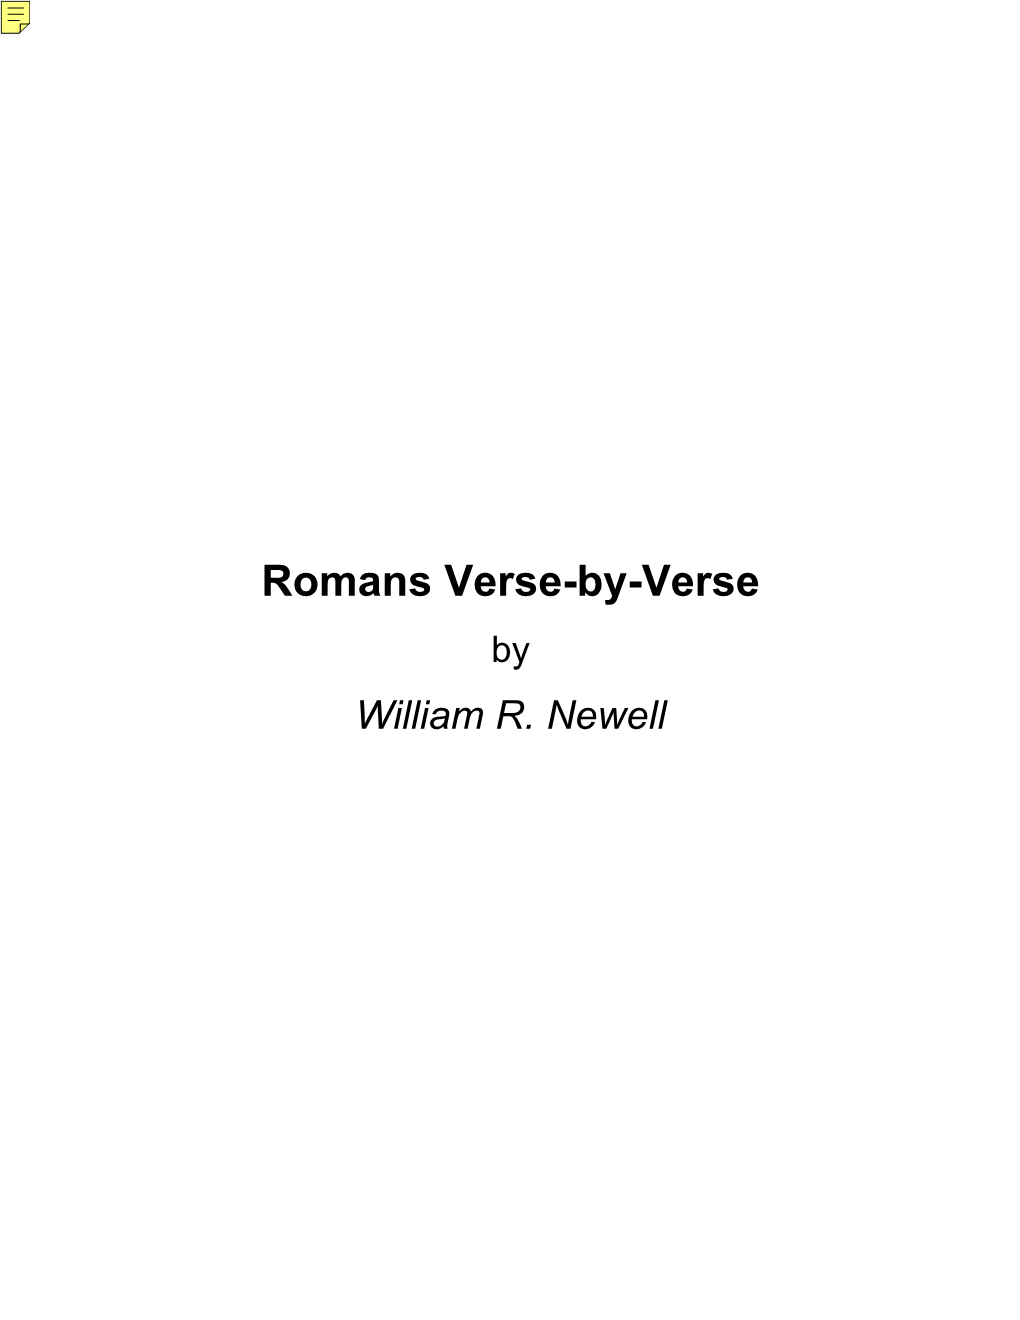 Romans Verse-By-Verse by William R